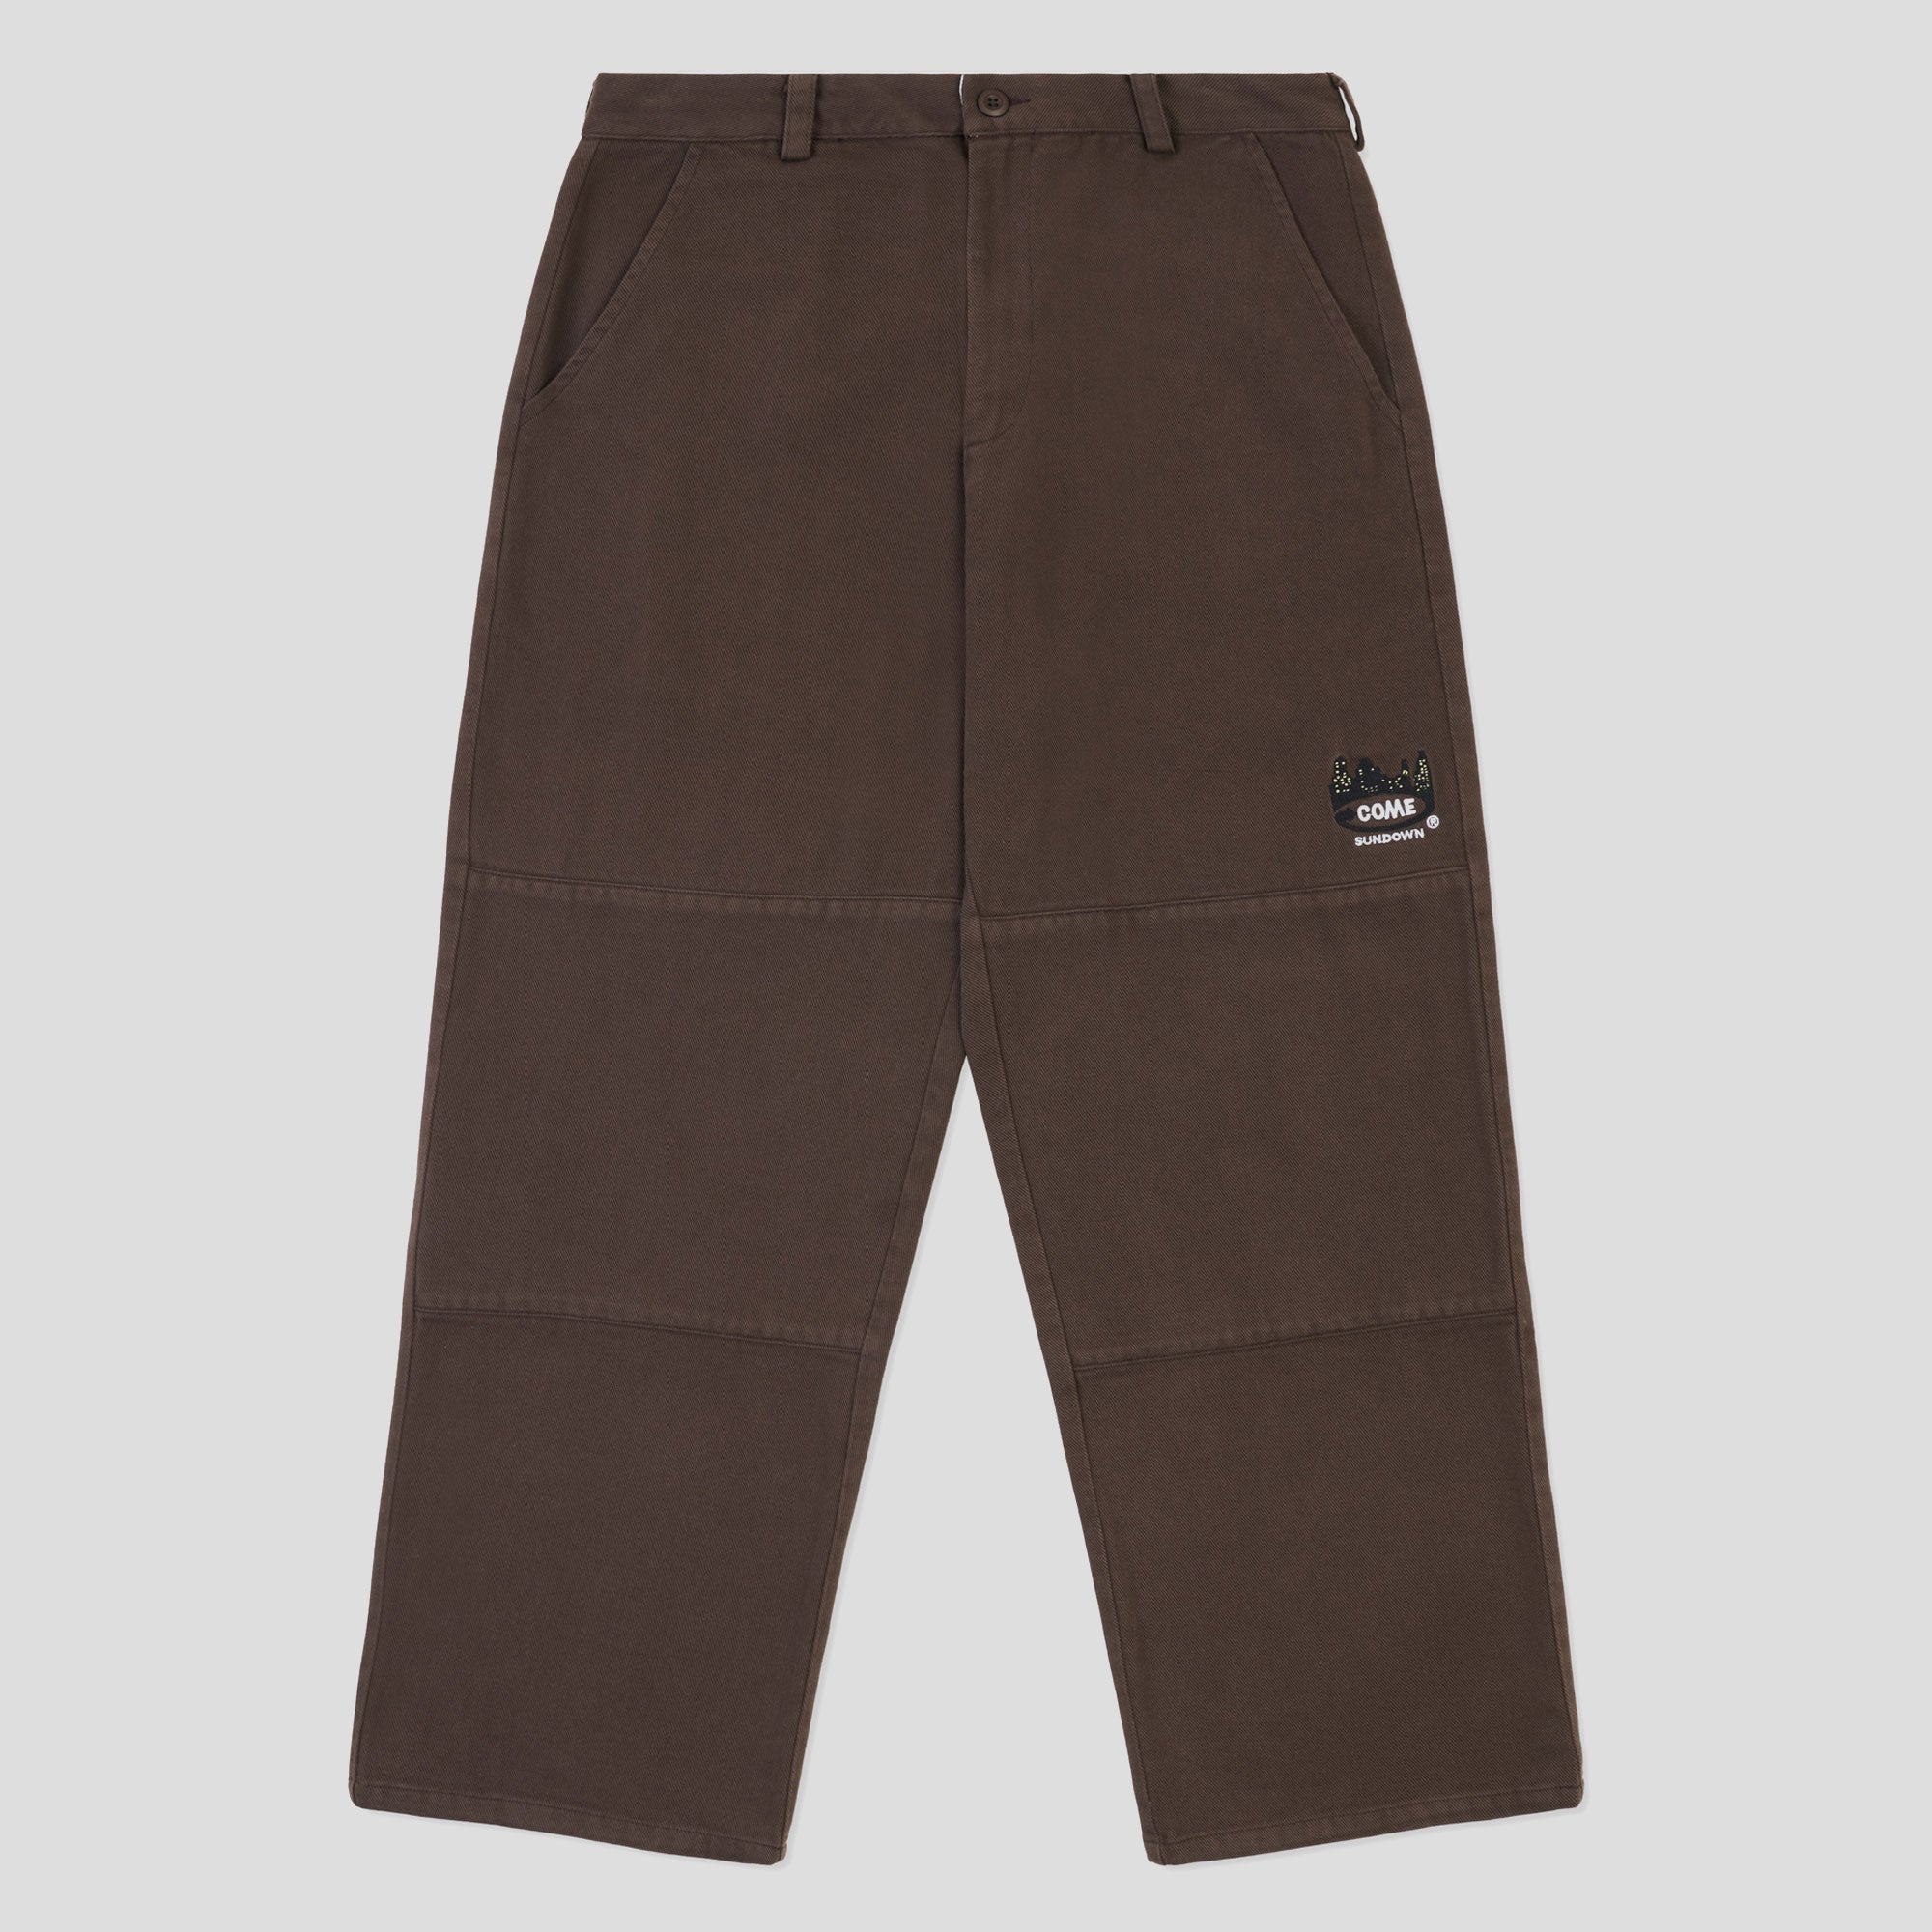 Come Sundown Toil Pant - Washed Brown